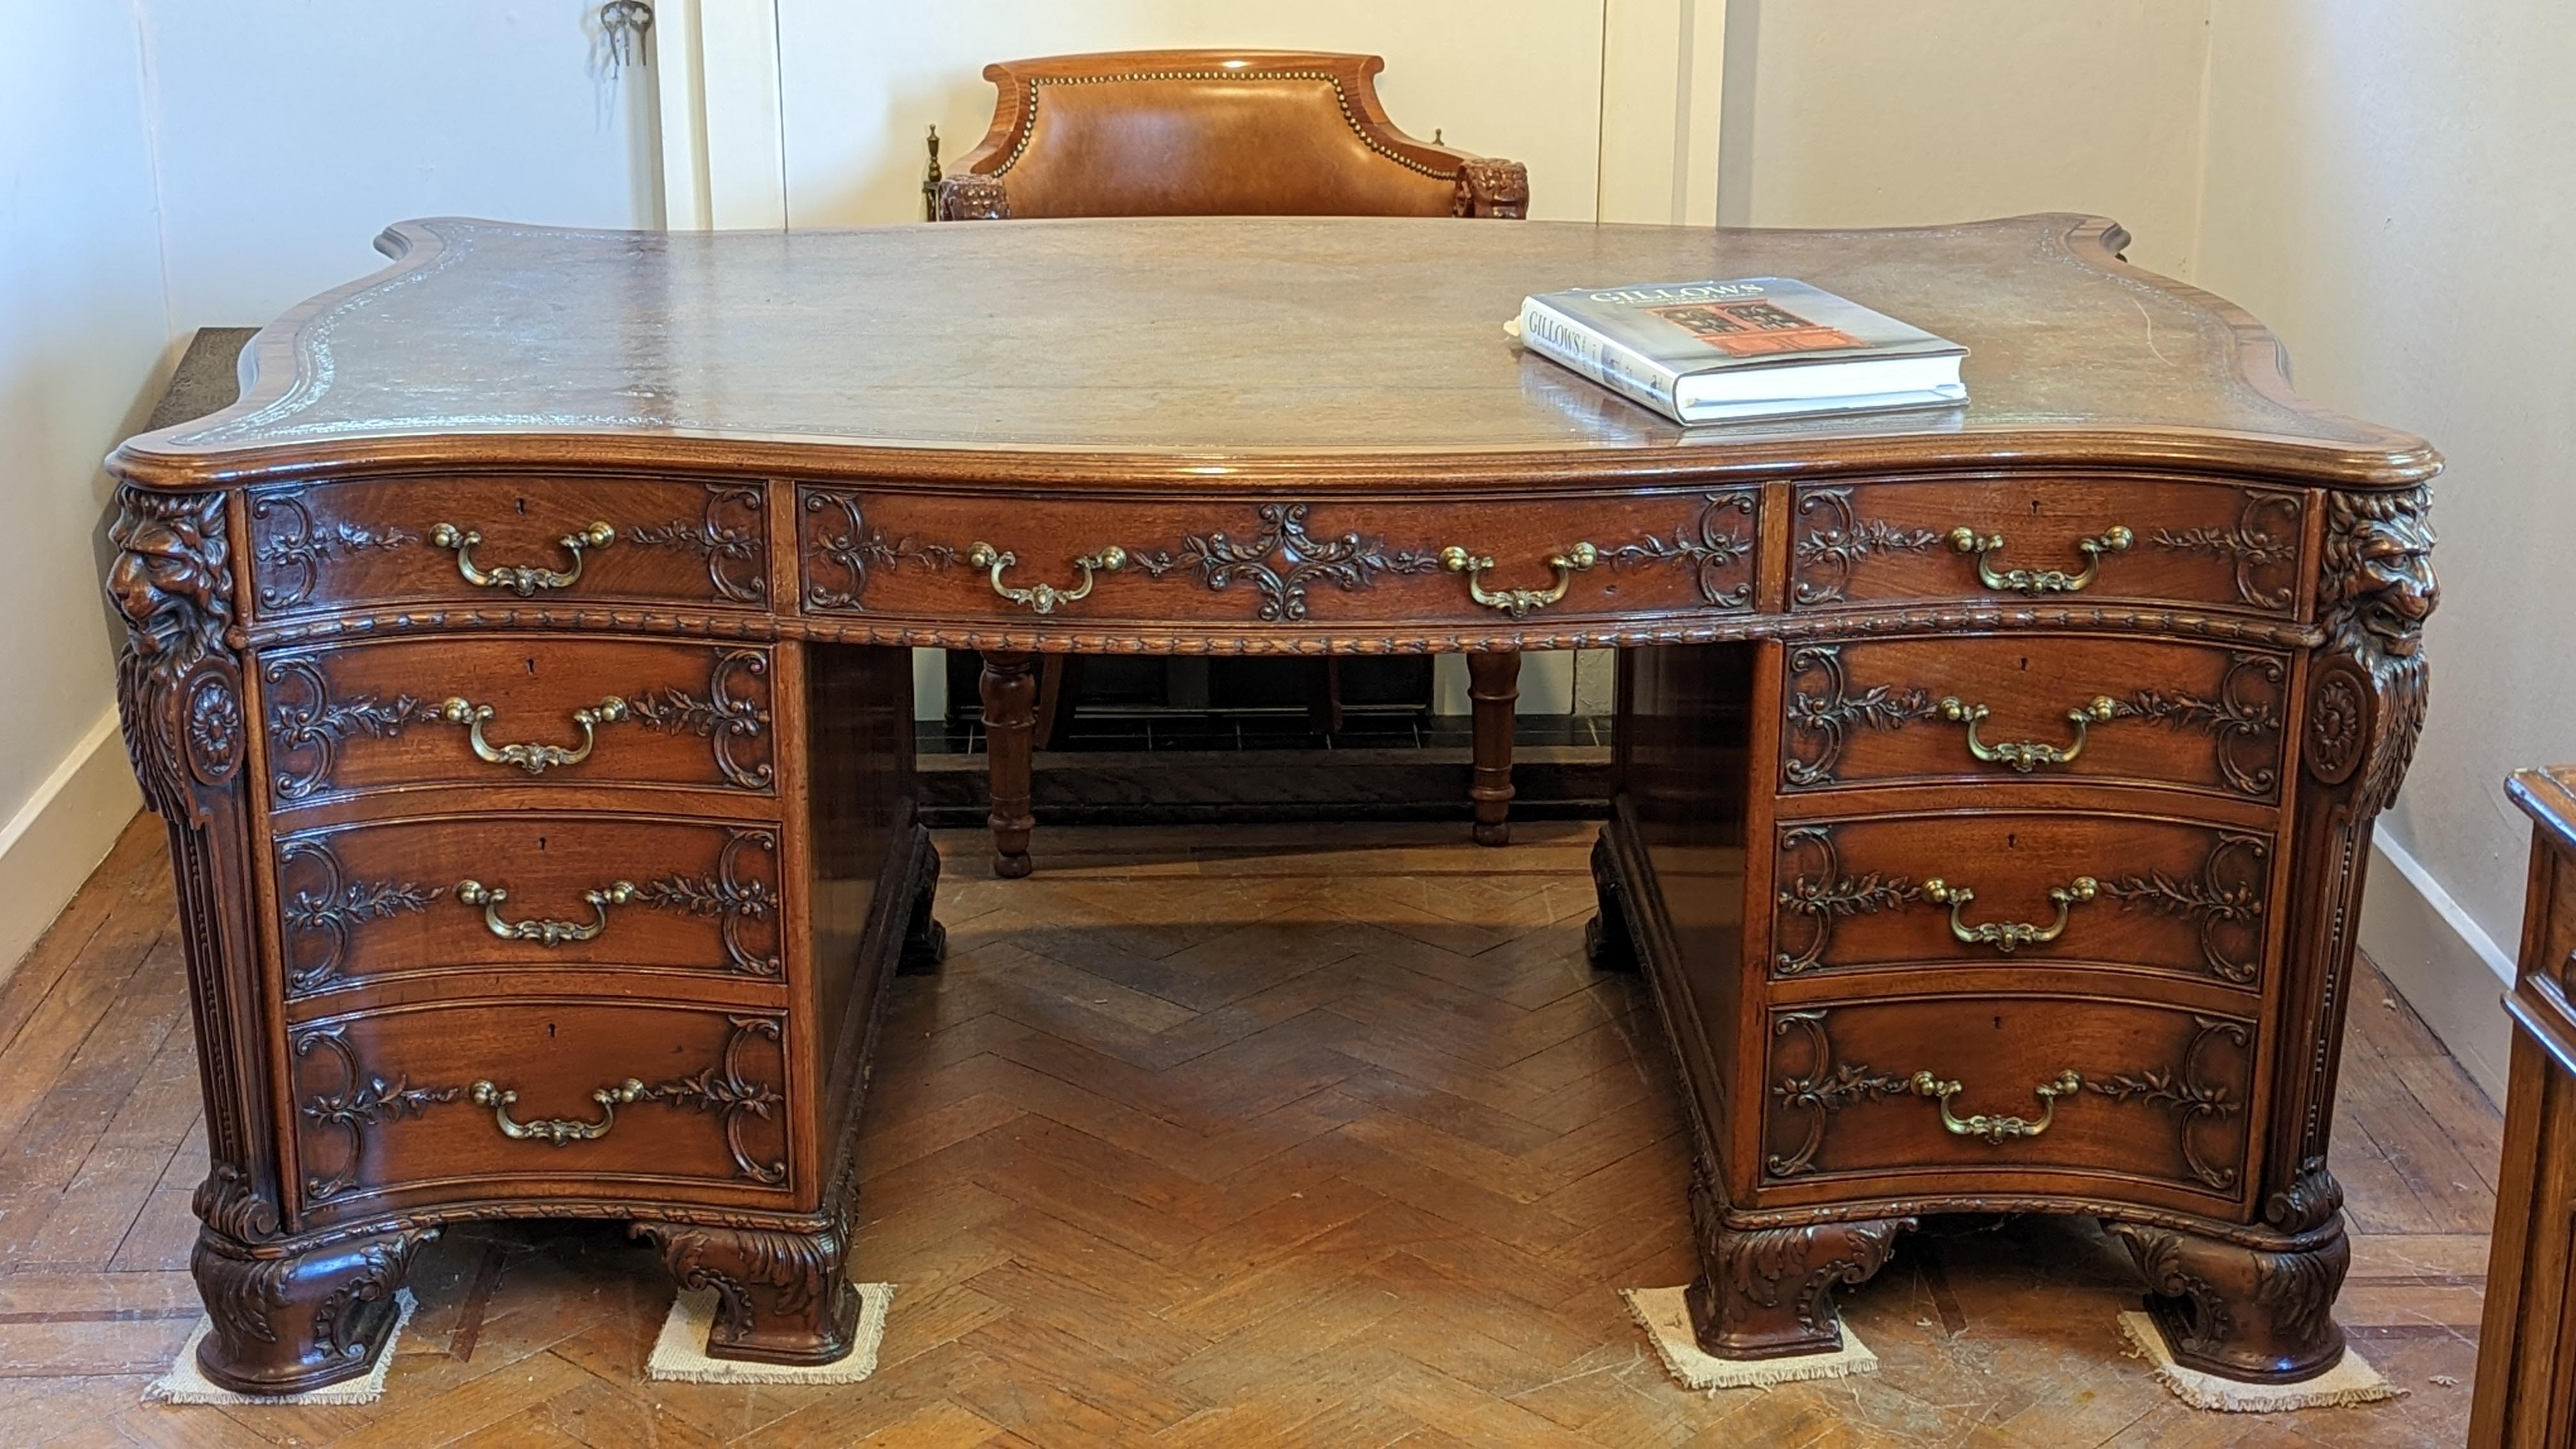 This superb shaped pedestal partners desk was made in the Victorian period of about 1870. It was made in the famous Gillows Cumbrian Workshop and the drawers and some of the locks are stamped Gillows or Gillows Lancaster. The solid serpentine shaped